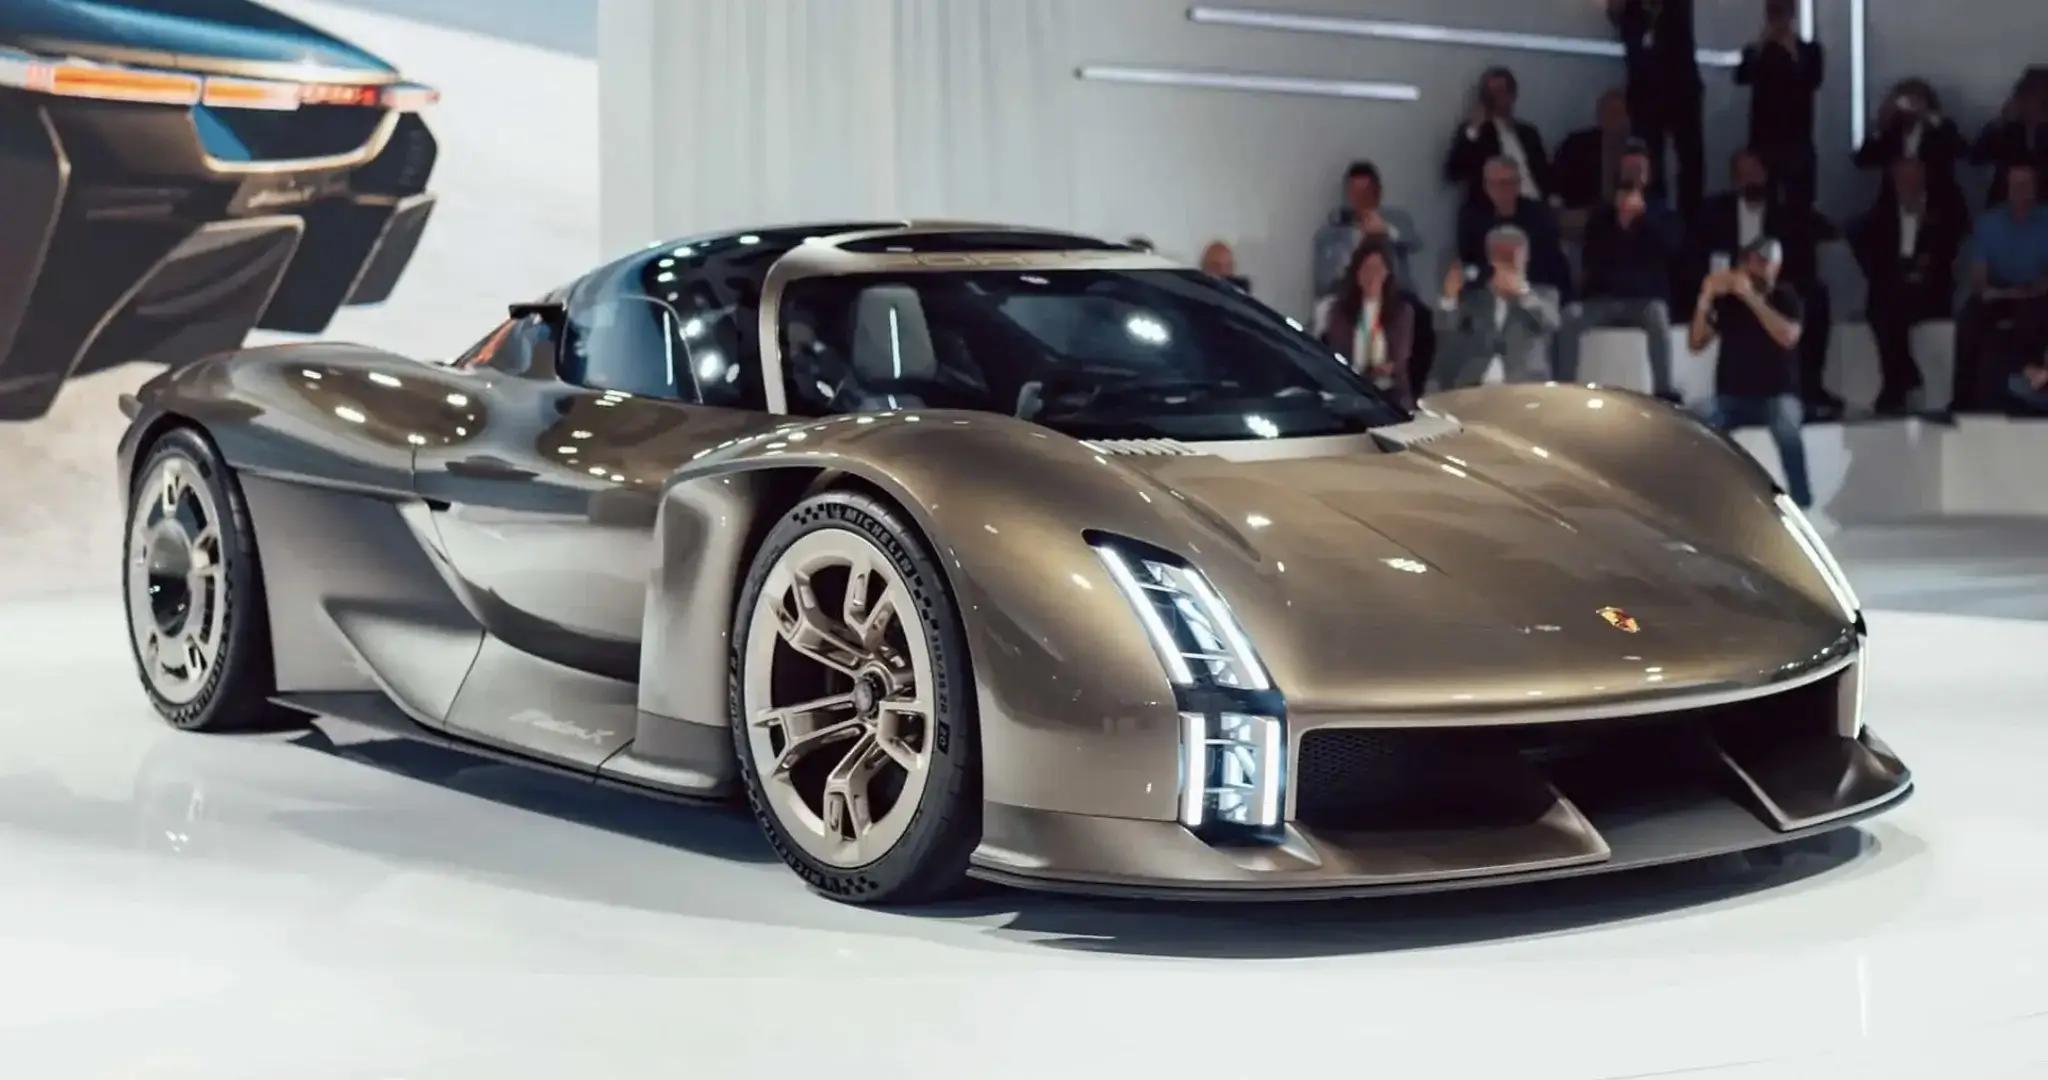 Porsche Says Its Next Hypercar Needs All-Wheel Drive. Here's Why